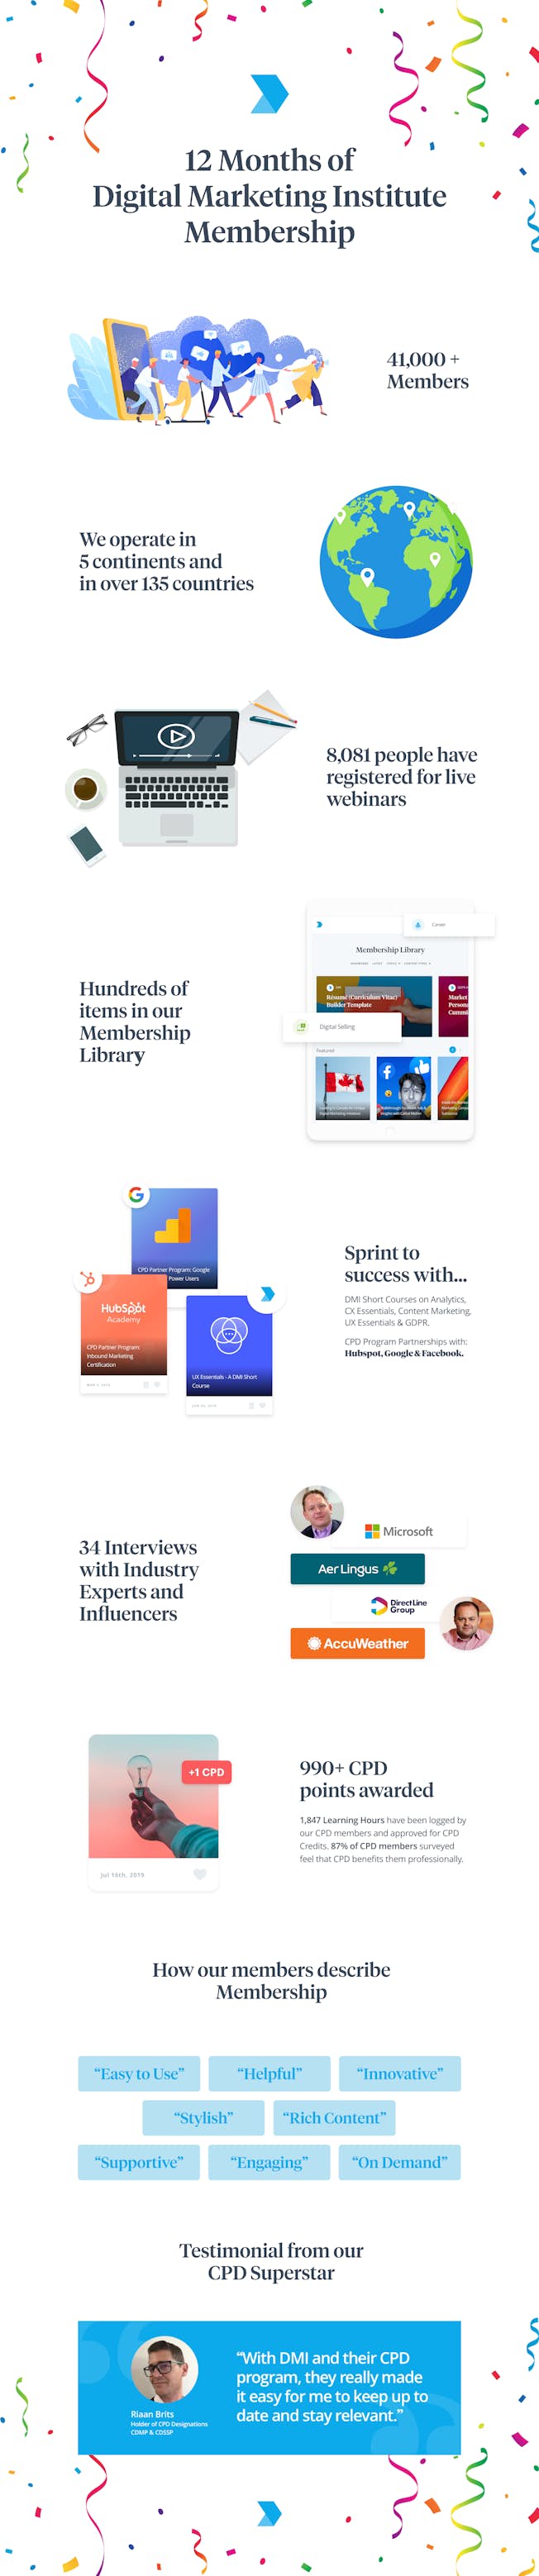 Infographic: 12 Months of Membership